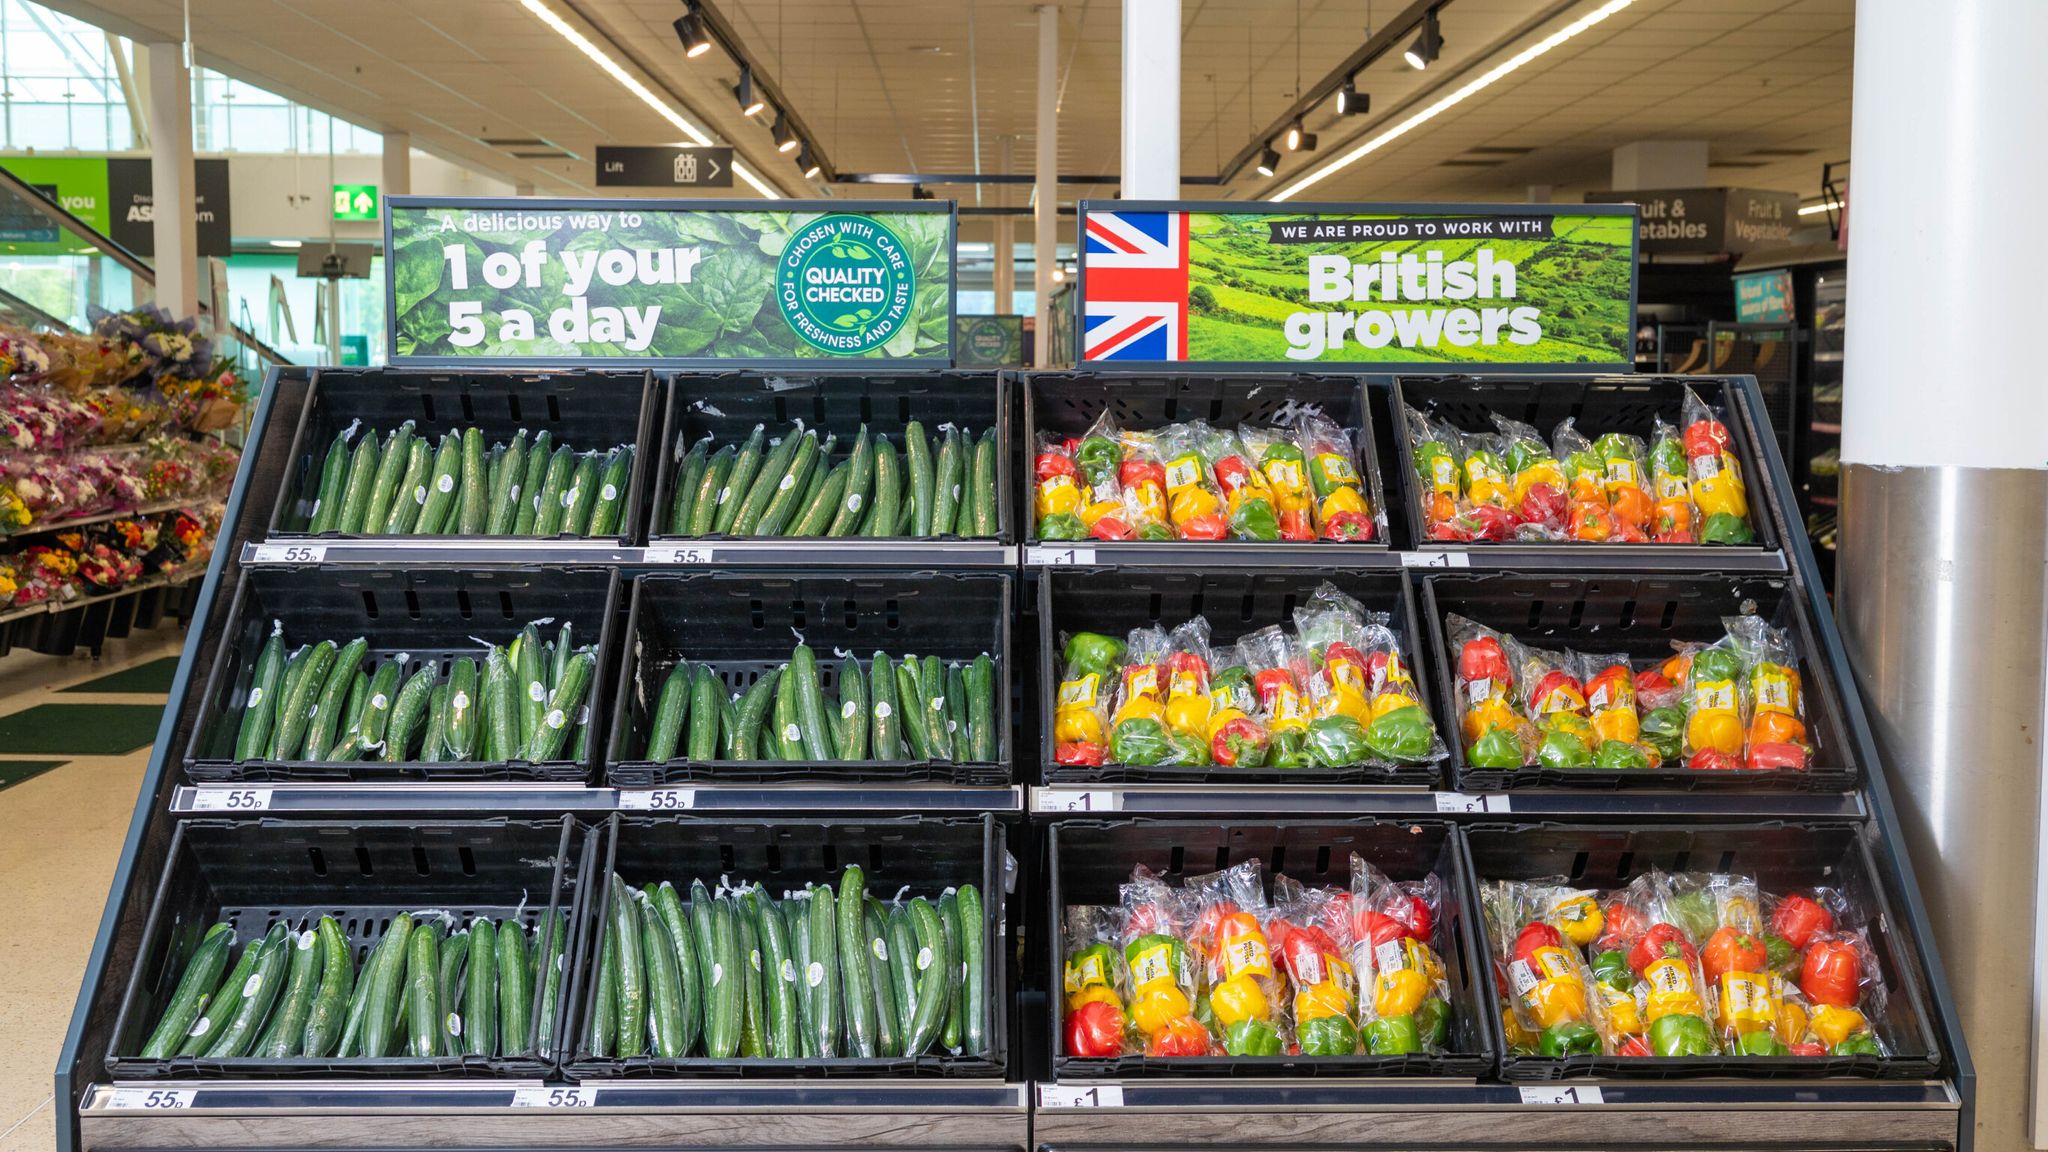 Asda reduces emissions by 16% over 12-month period - edie